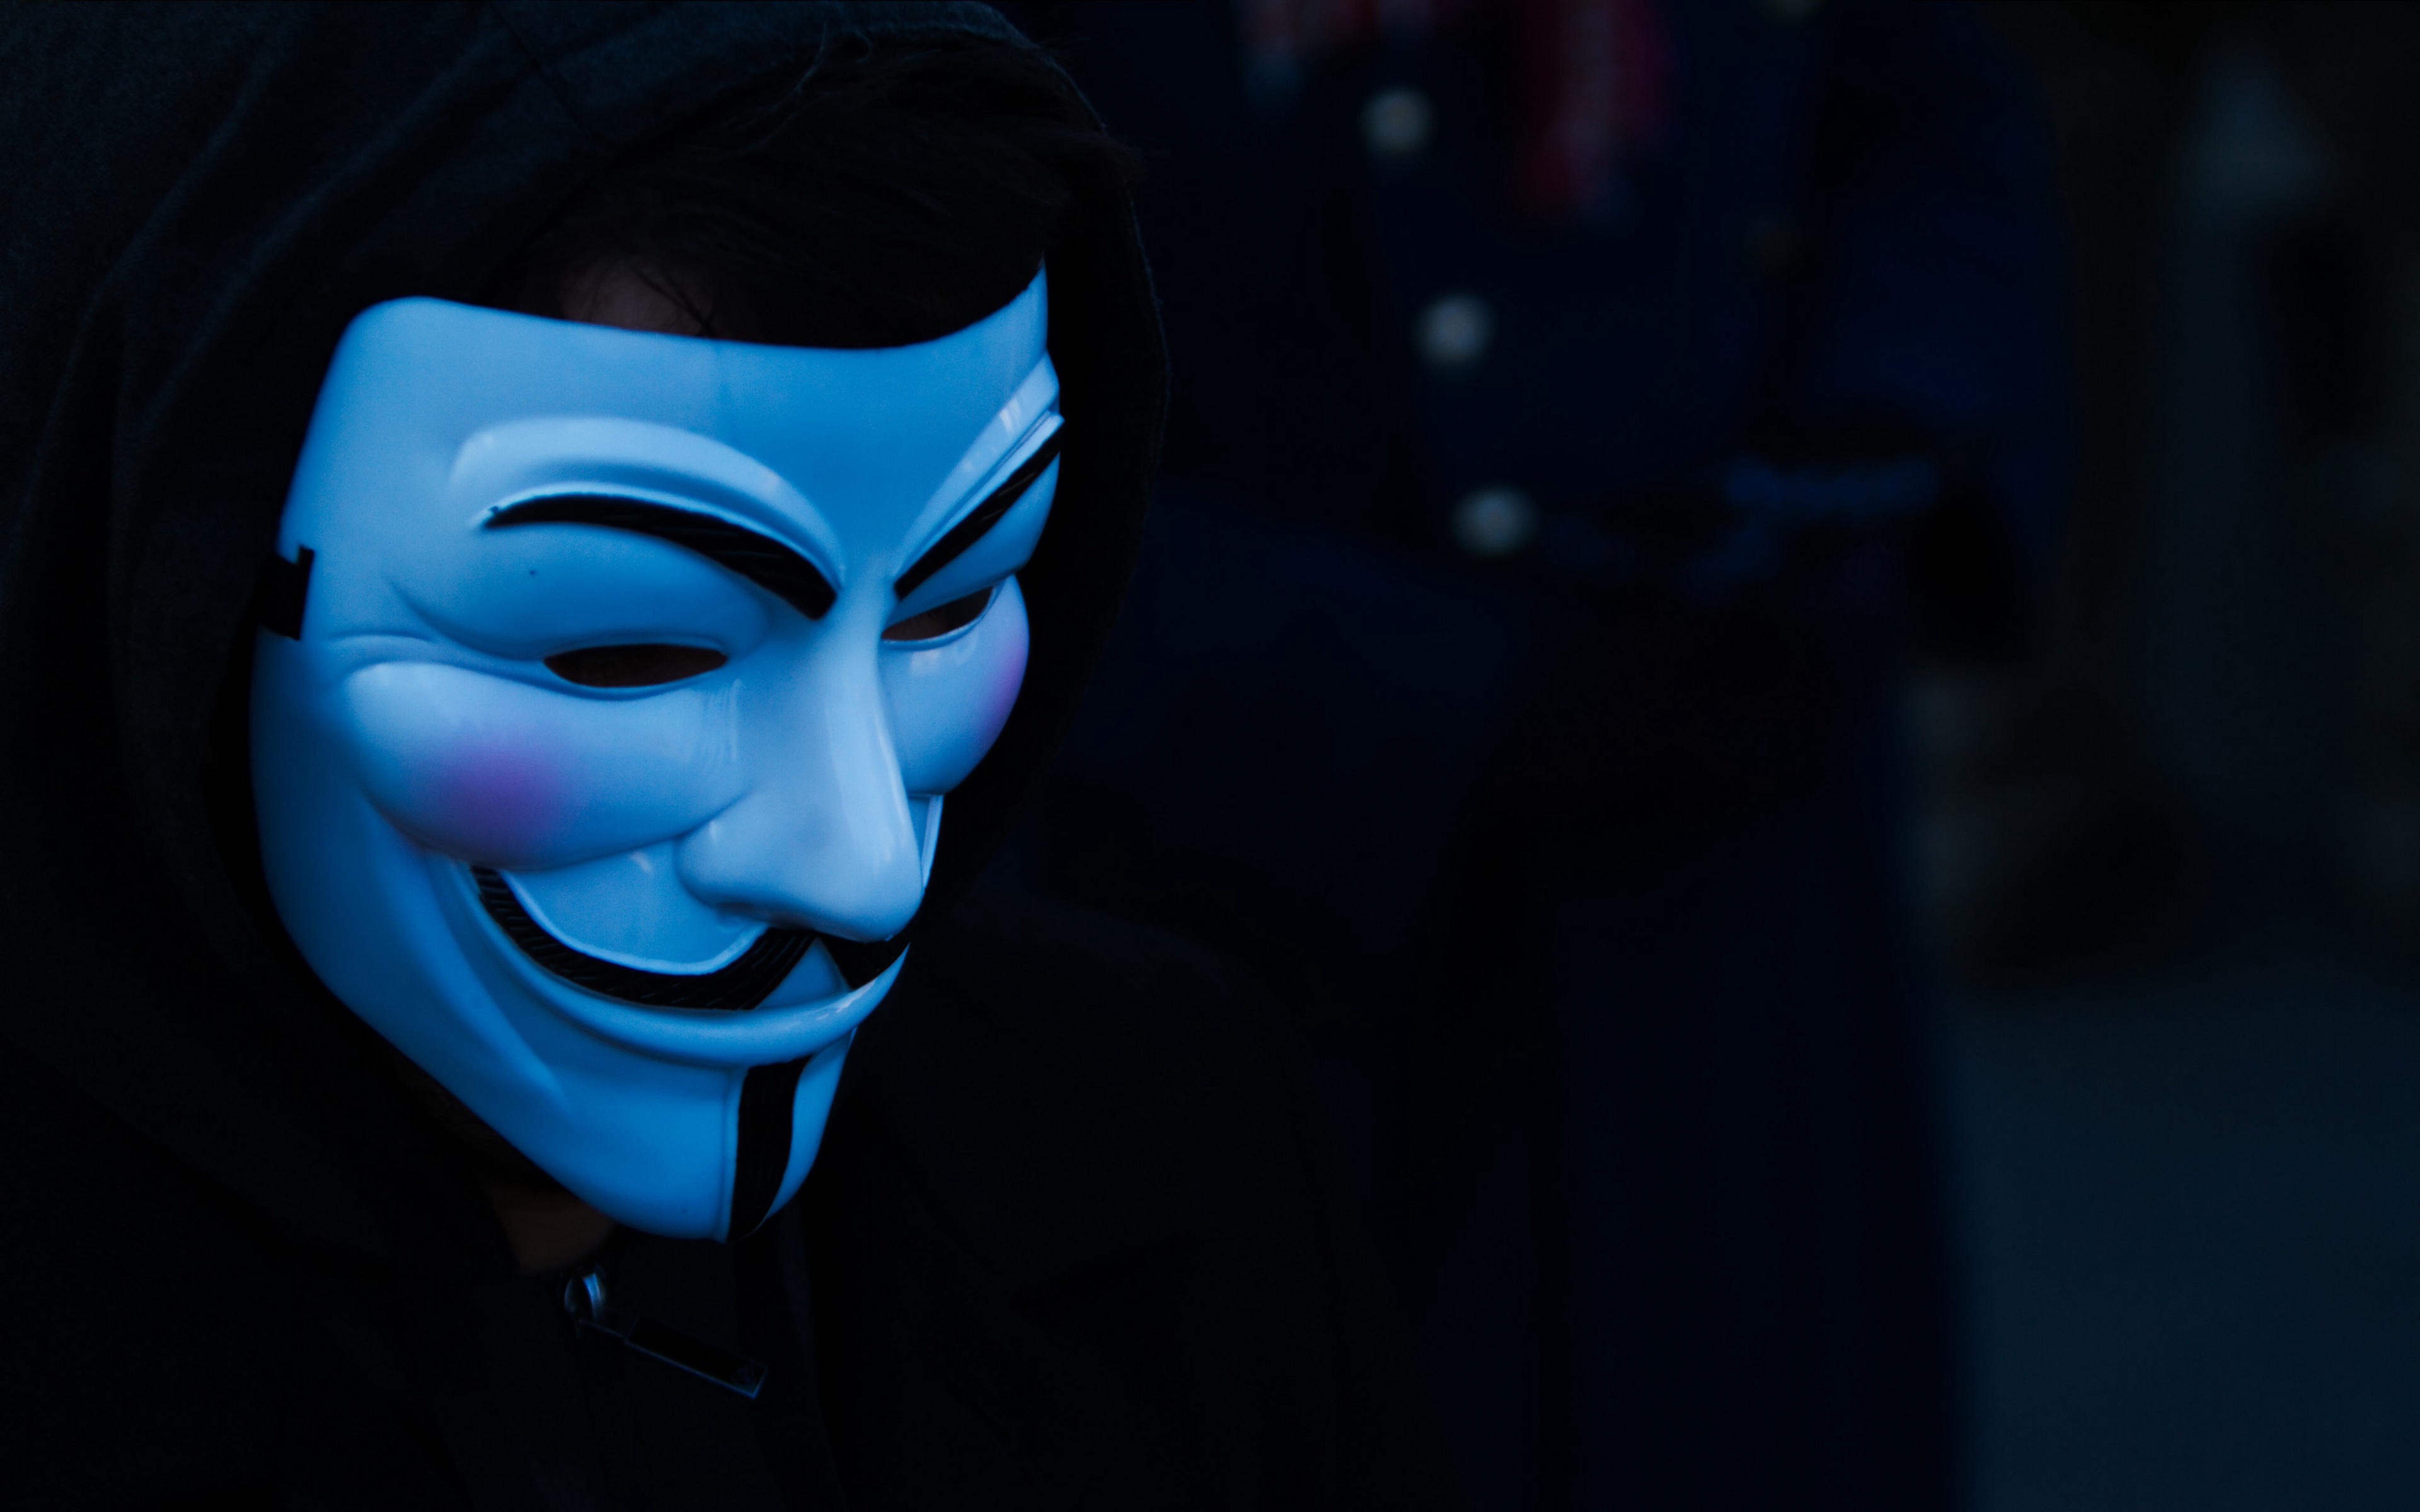 Mask Anonymous Hoods Blue Guy Fawkes Mask 3840x2400